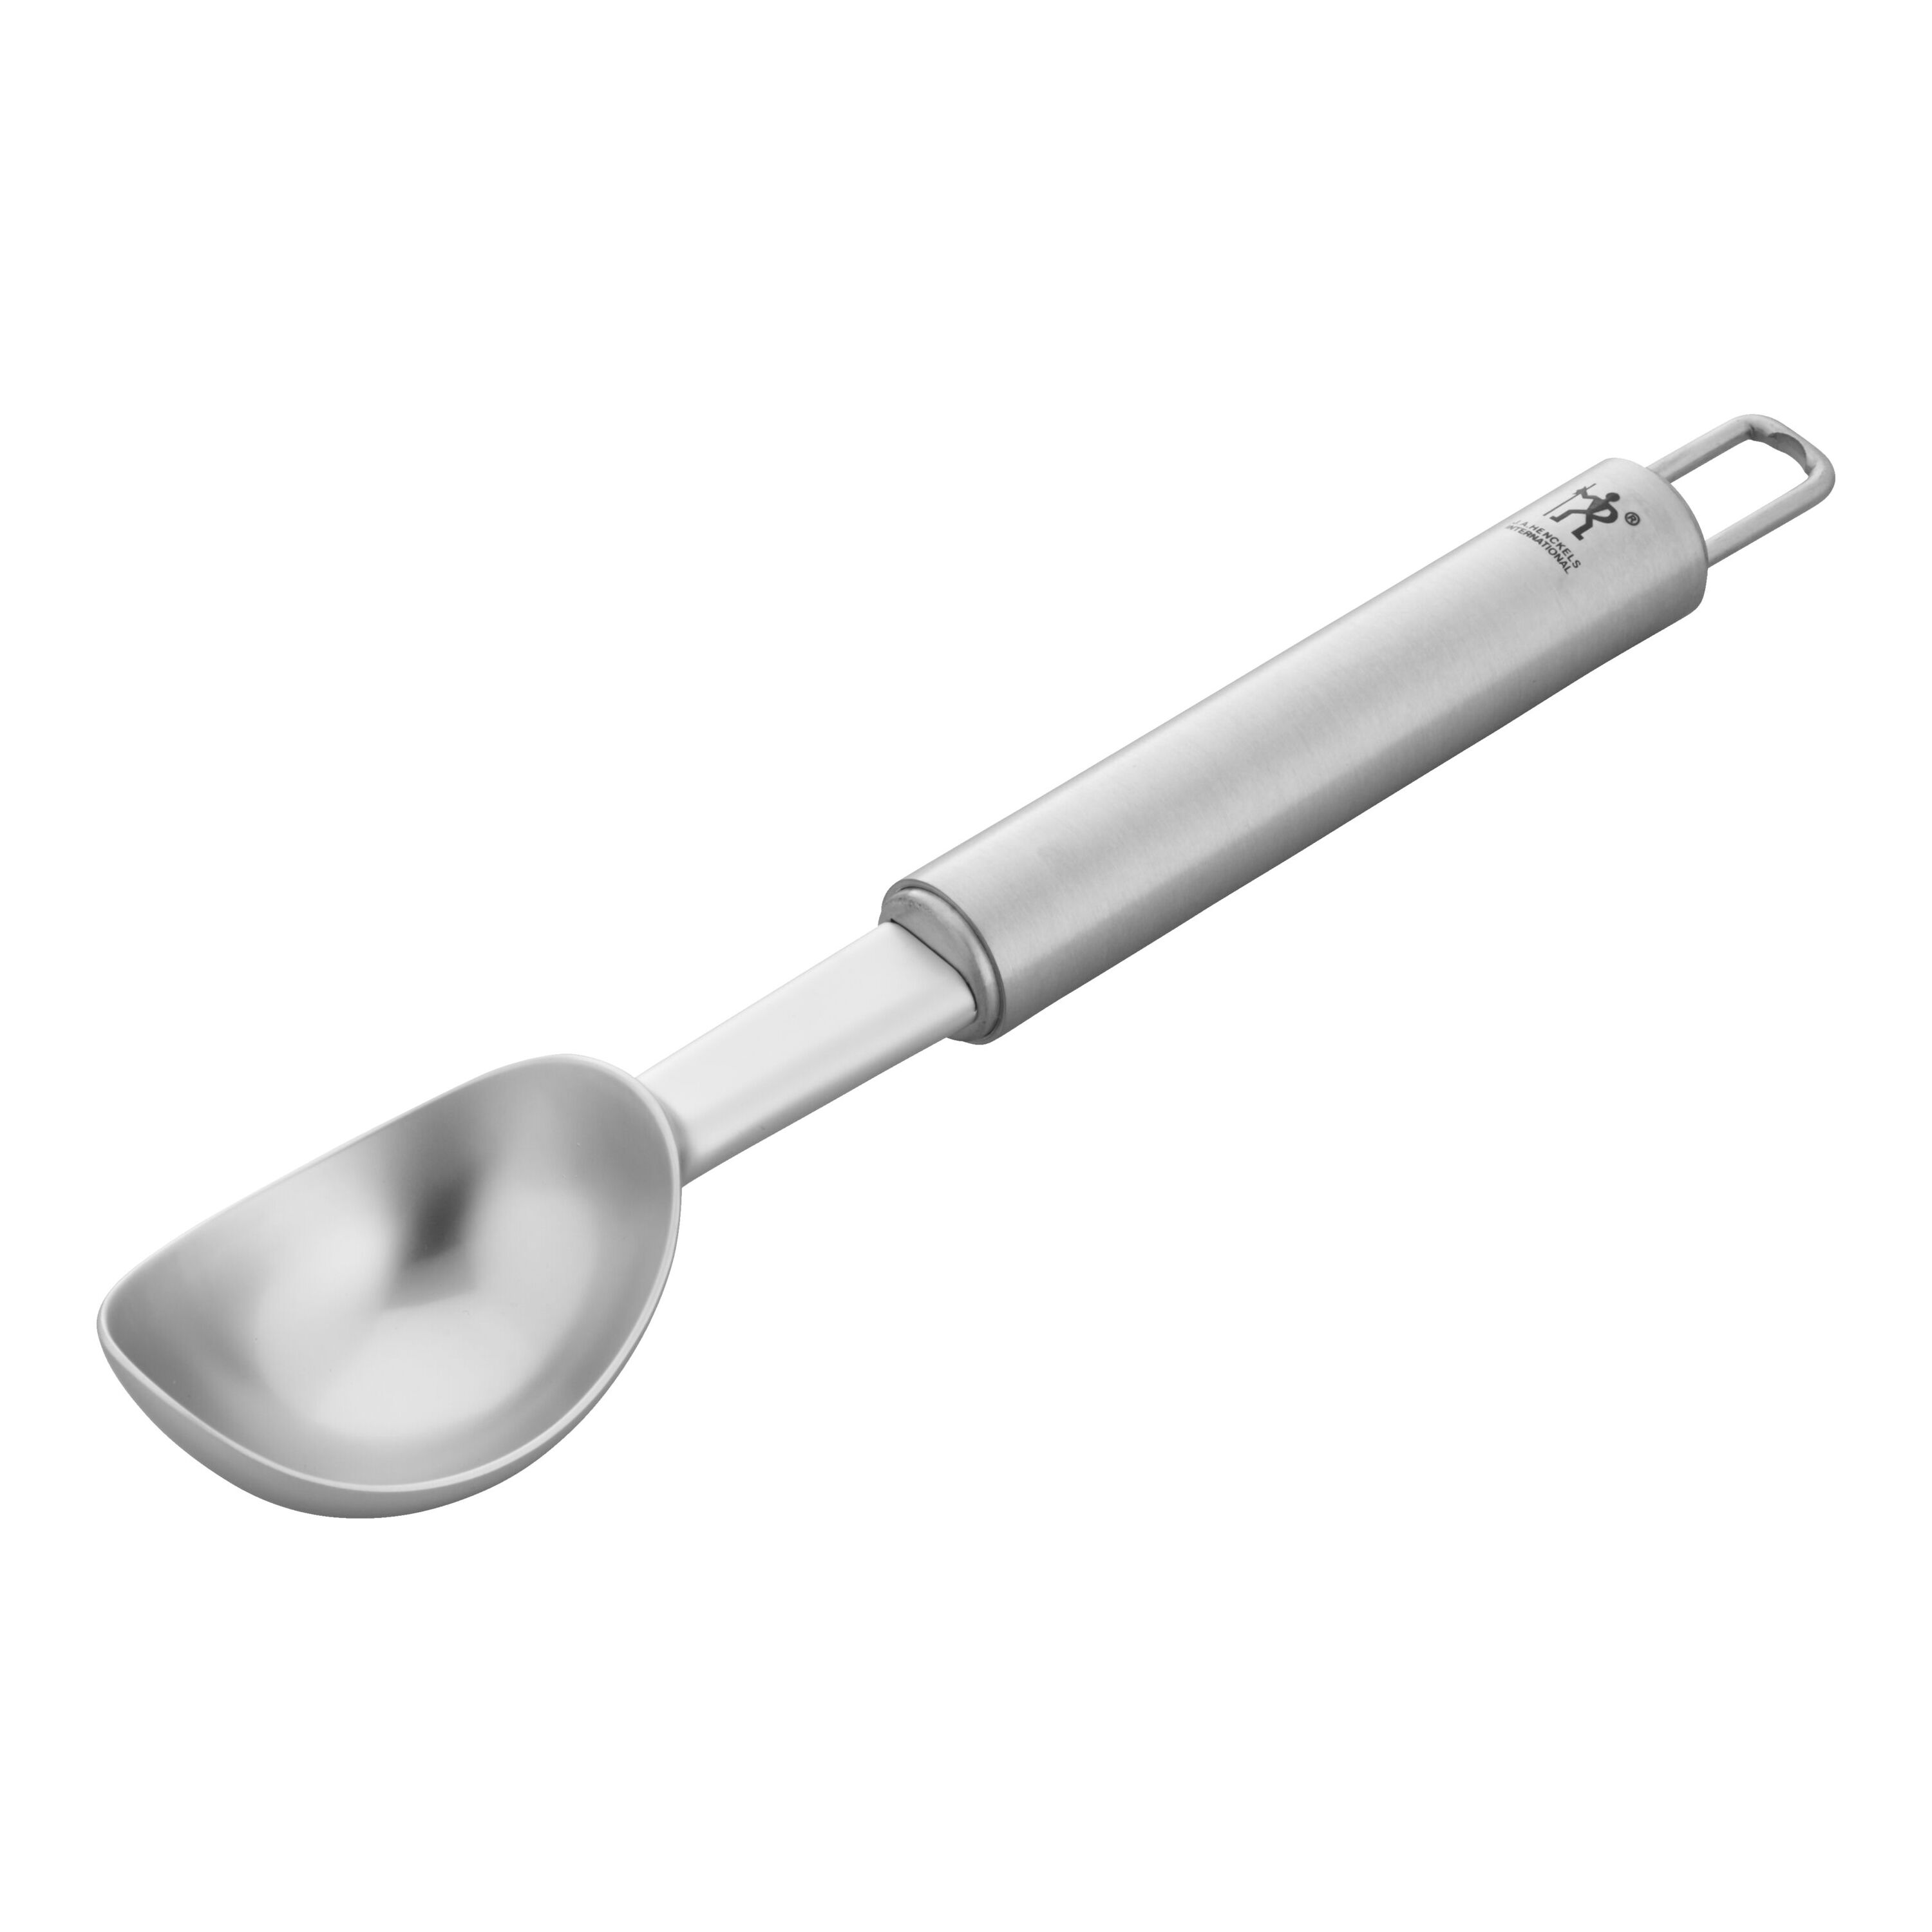 Good Cook Touch Ice Cream Scoop, Gagets